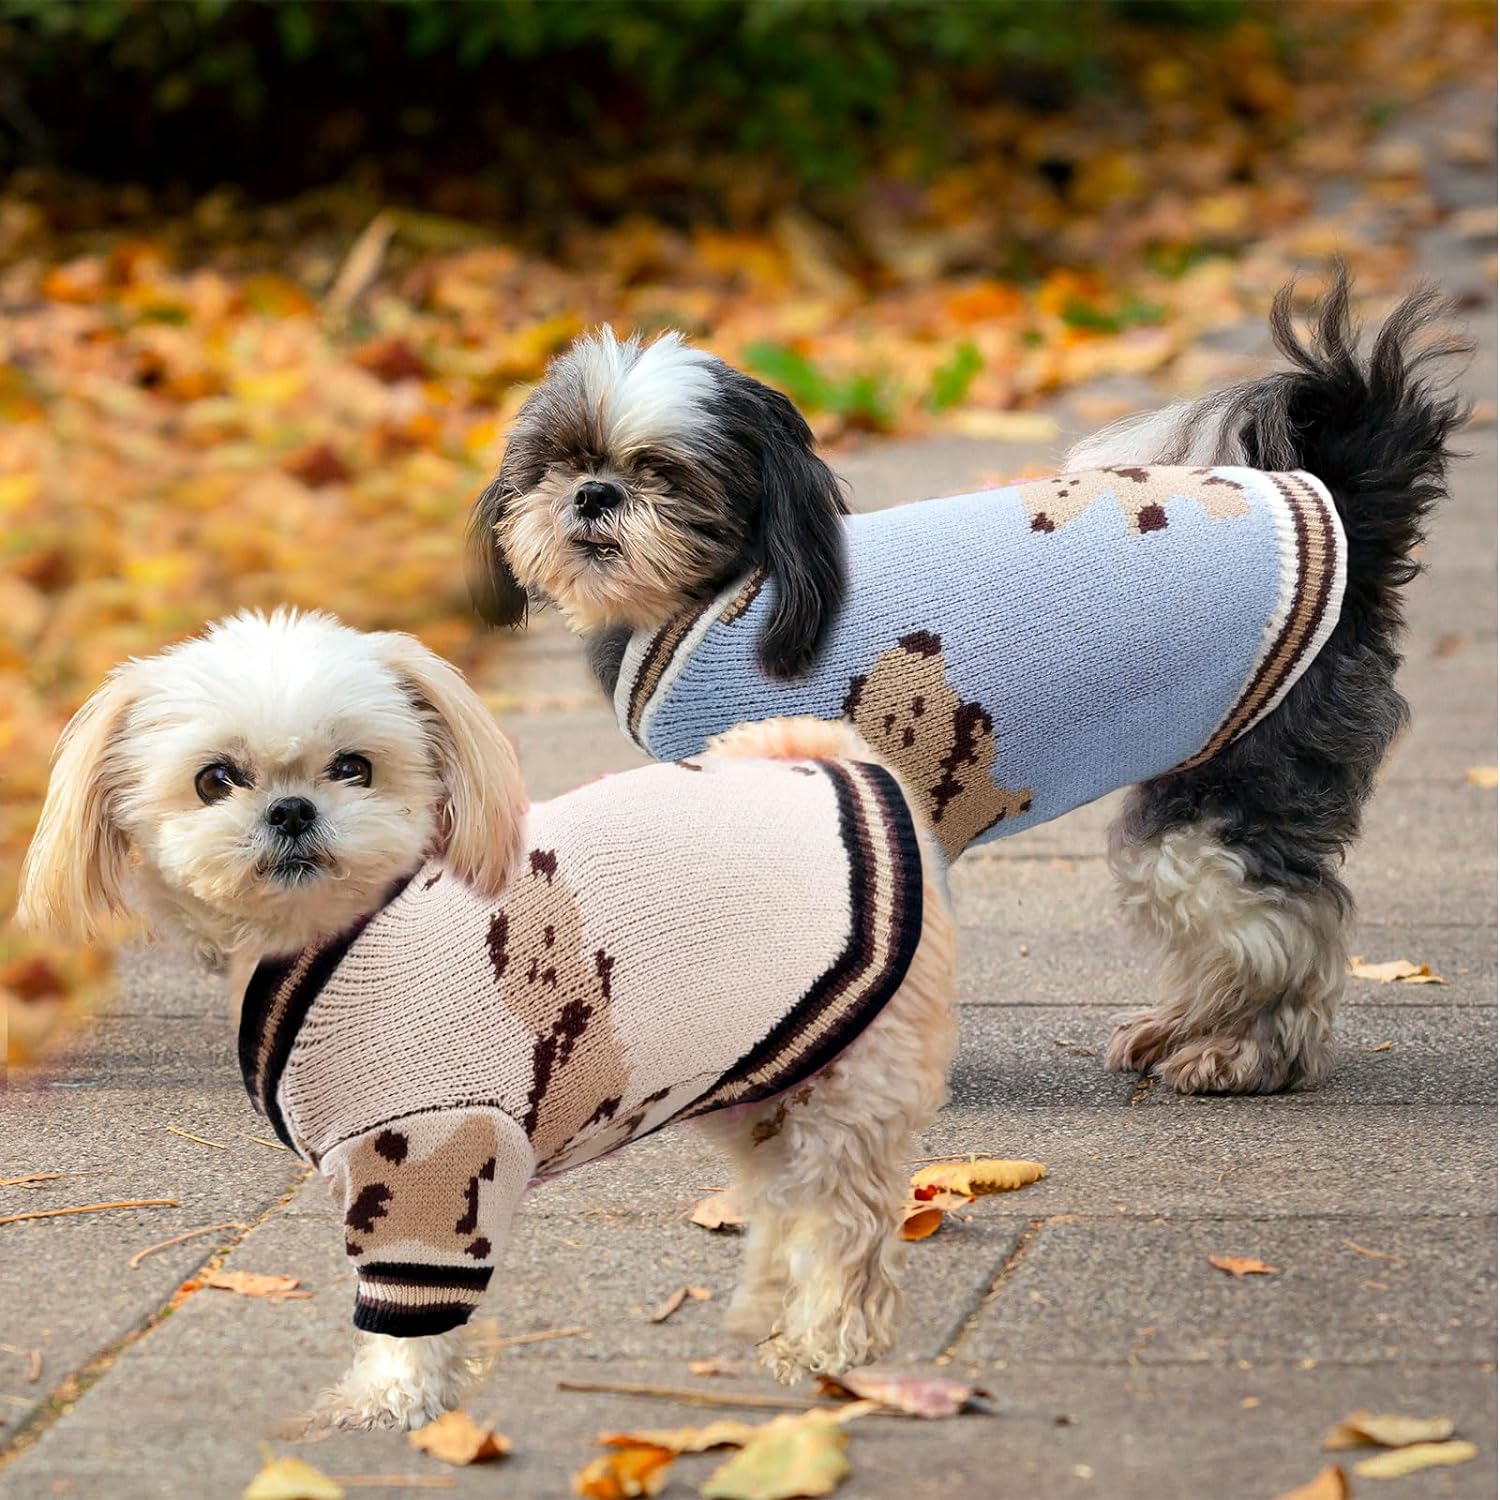 Small Dog Sweaters Cute Bear Dog Cardigans Clothes for Small Medium Dogs Boy Girl Puppy Cat Knitting Cardigan Outfits Dog Winter Coats Warm Pet Dog Clothes Soft Knitwear Apparel (Stripe,L)